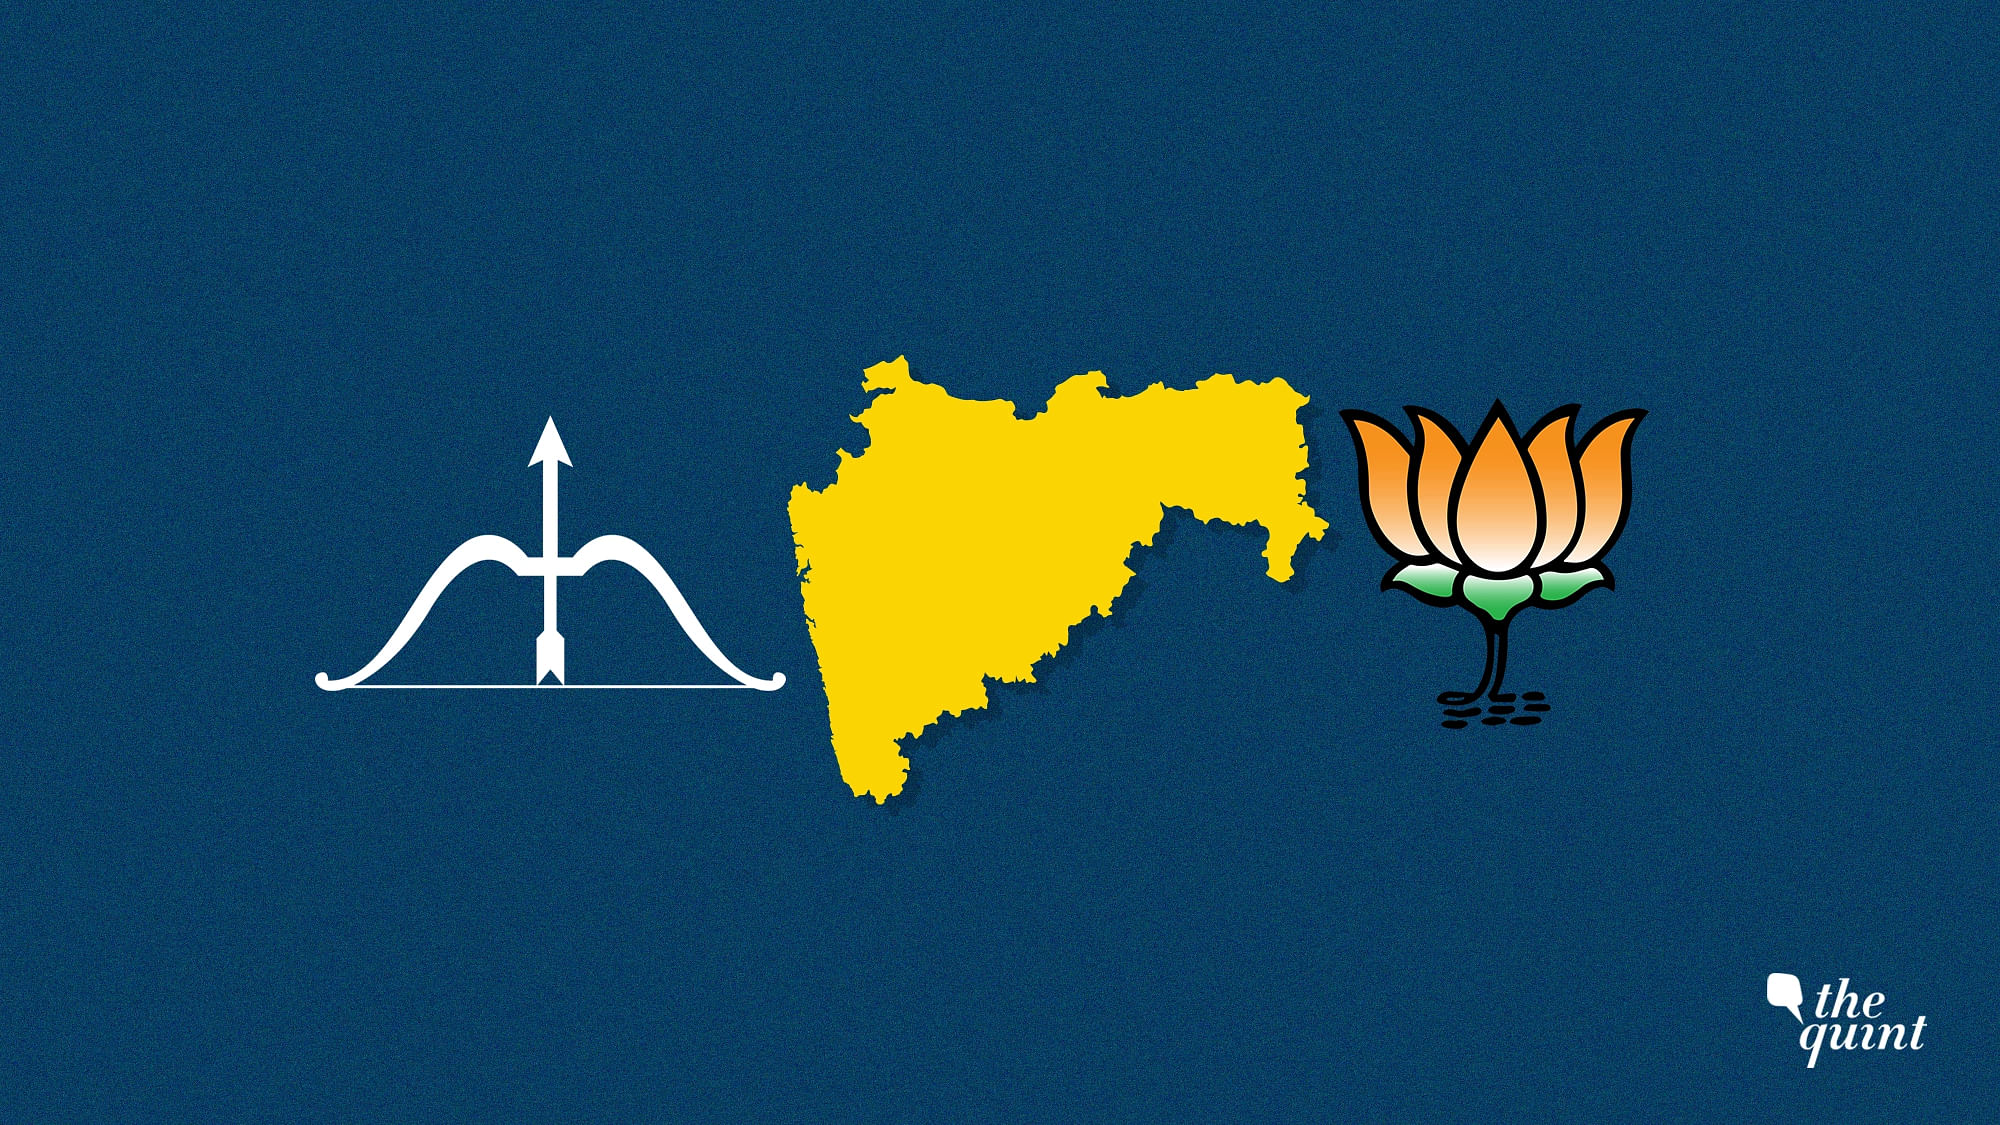 Party symbols of Shiv Sena and BJP. Image used for representational purposes.